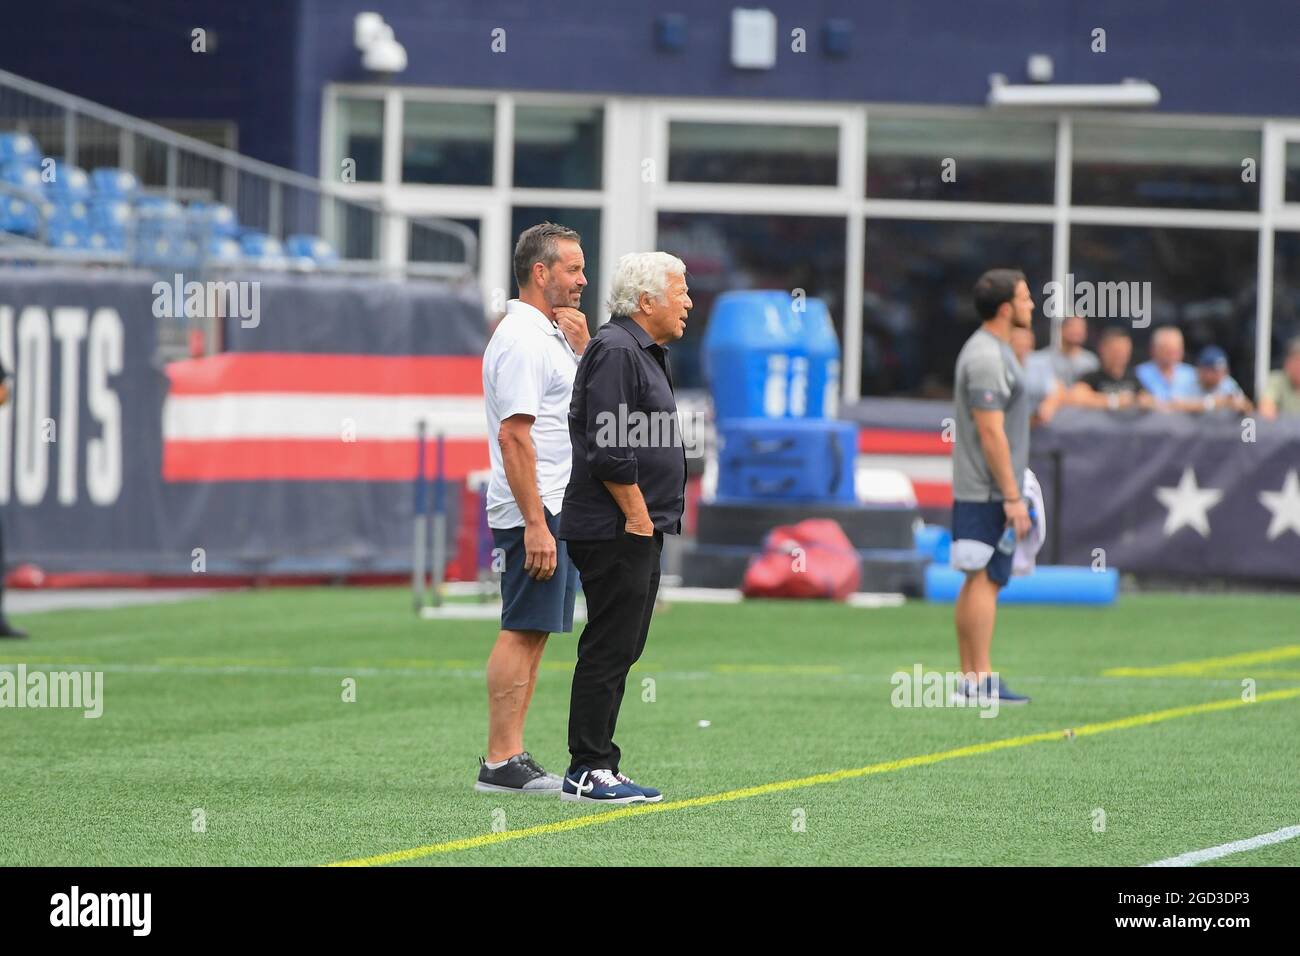 Tuesday, August 10, 2021: New England Patriots owner Robert Kraft (black shirt) watches practice at the New England Patriots training camp held at Gillette Stadium, in Foxborough, Massachusetts. Eric Canha/CSM Stock Photo